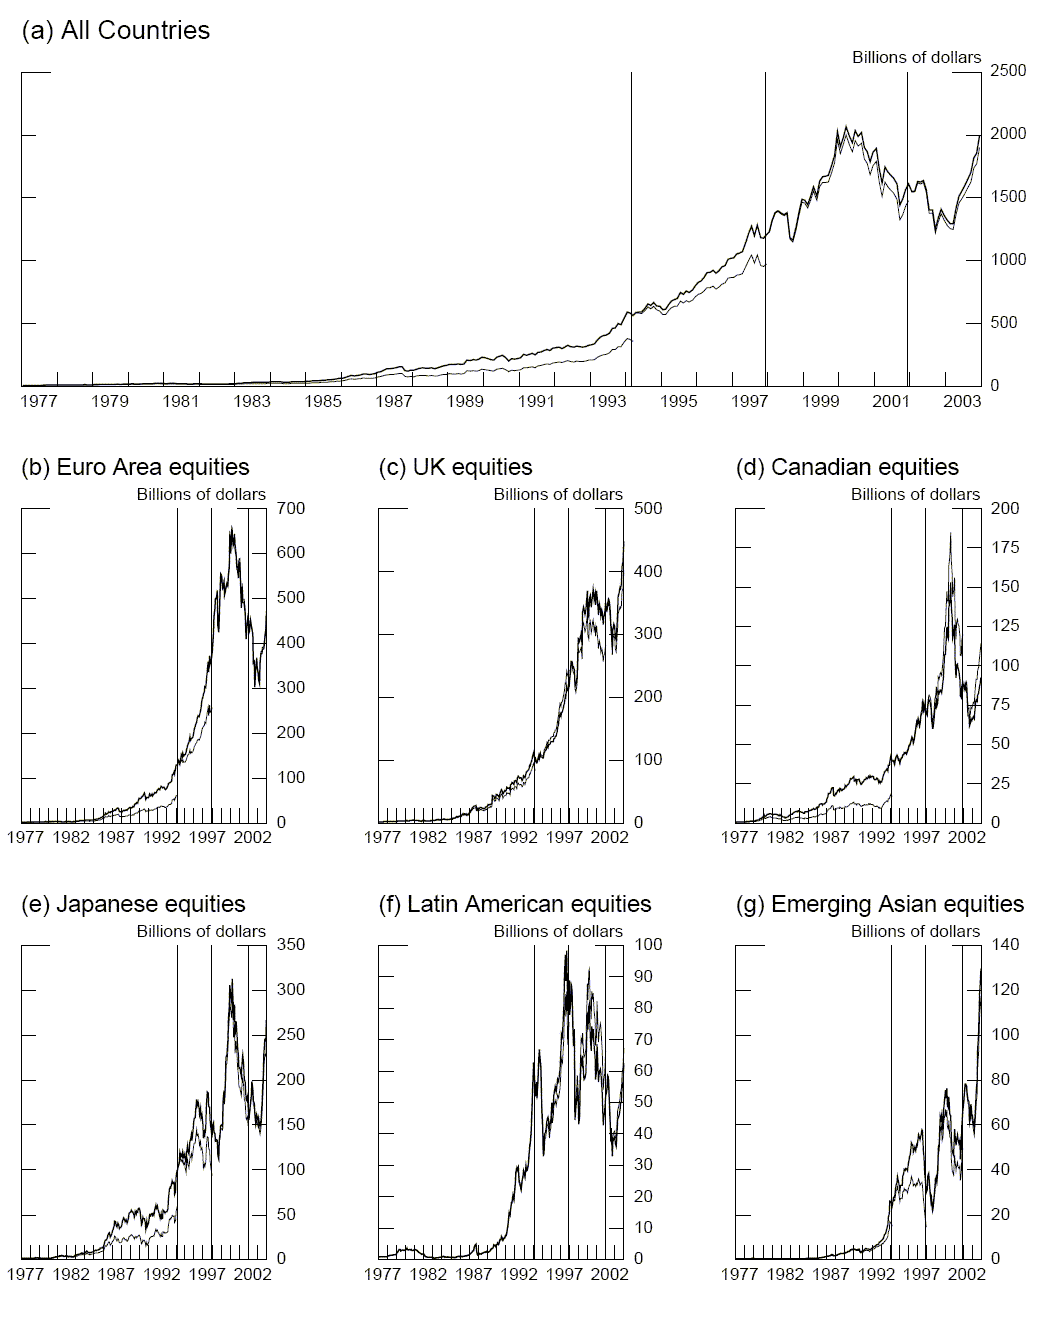 Figure 1 shows estimated holdings of U.S. investor foreign portfolios using two methods: (1) a naive method which only accumulates monthly capital flows data (thin lines) and (2) our benchmark-consistent estimates which accumulates monthly capital flows data and anchors them with our benchmark surveys.  
Data are plotted for 1977-2003 in billions of dollars.  Panel (a) show the estimated holdings for all countries.  The remaining panels are for (b) Euro area equities, (c) UK equities, (d) Canadian equities, (e) Japanese equities, (f) Latin American equities, and (g) Emerging Asian equities.  
In all panels, U.S. holdings rise at an increasing rate through around 2000, then fall for the next couple of years, rising again at the end of the sample.
The main point of the figure is to show that if we use the first method, we will have incorrect holdings estimates.